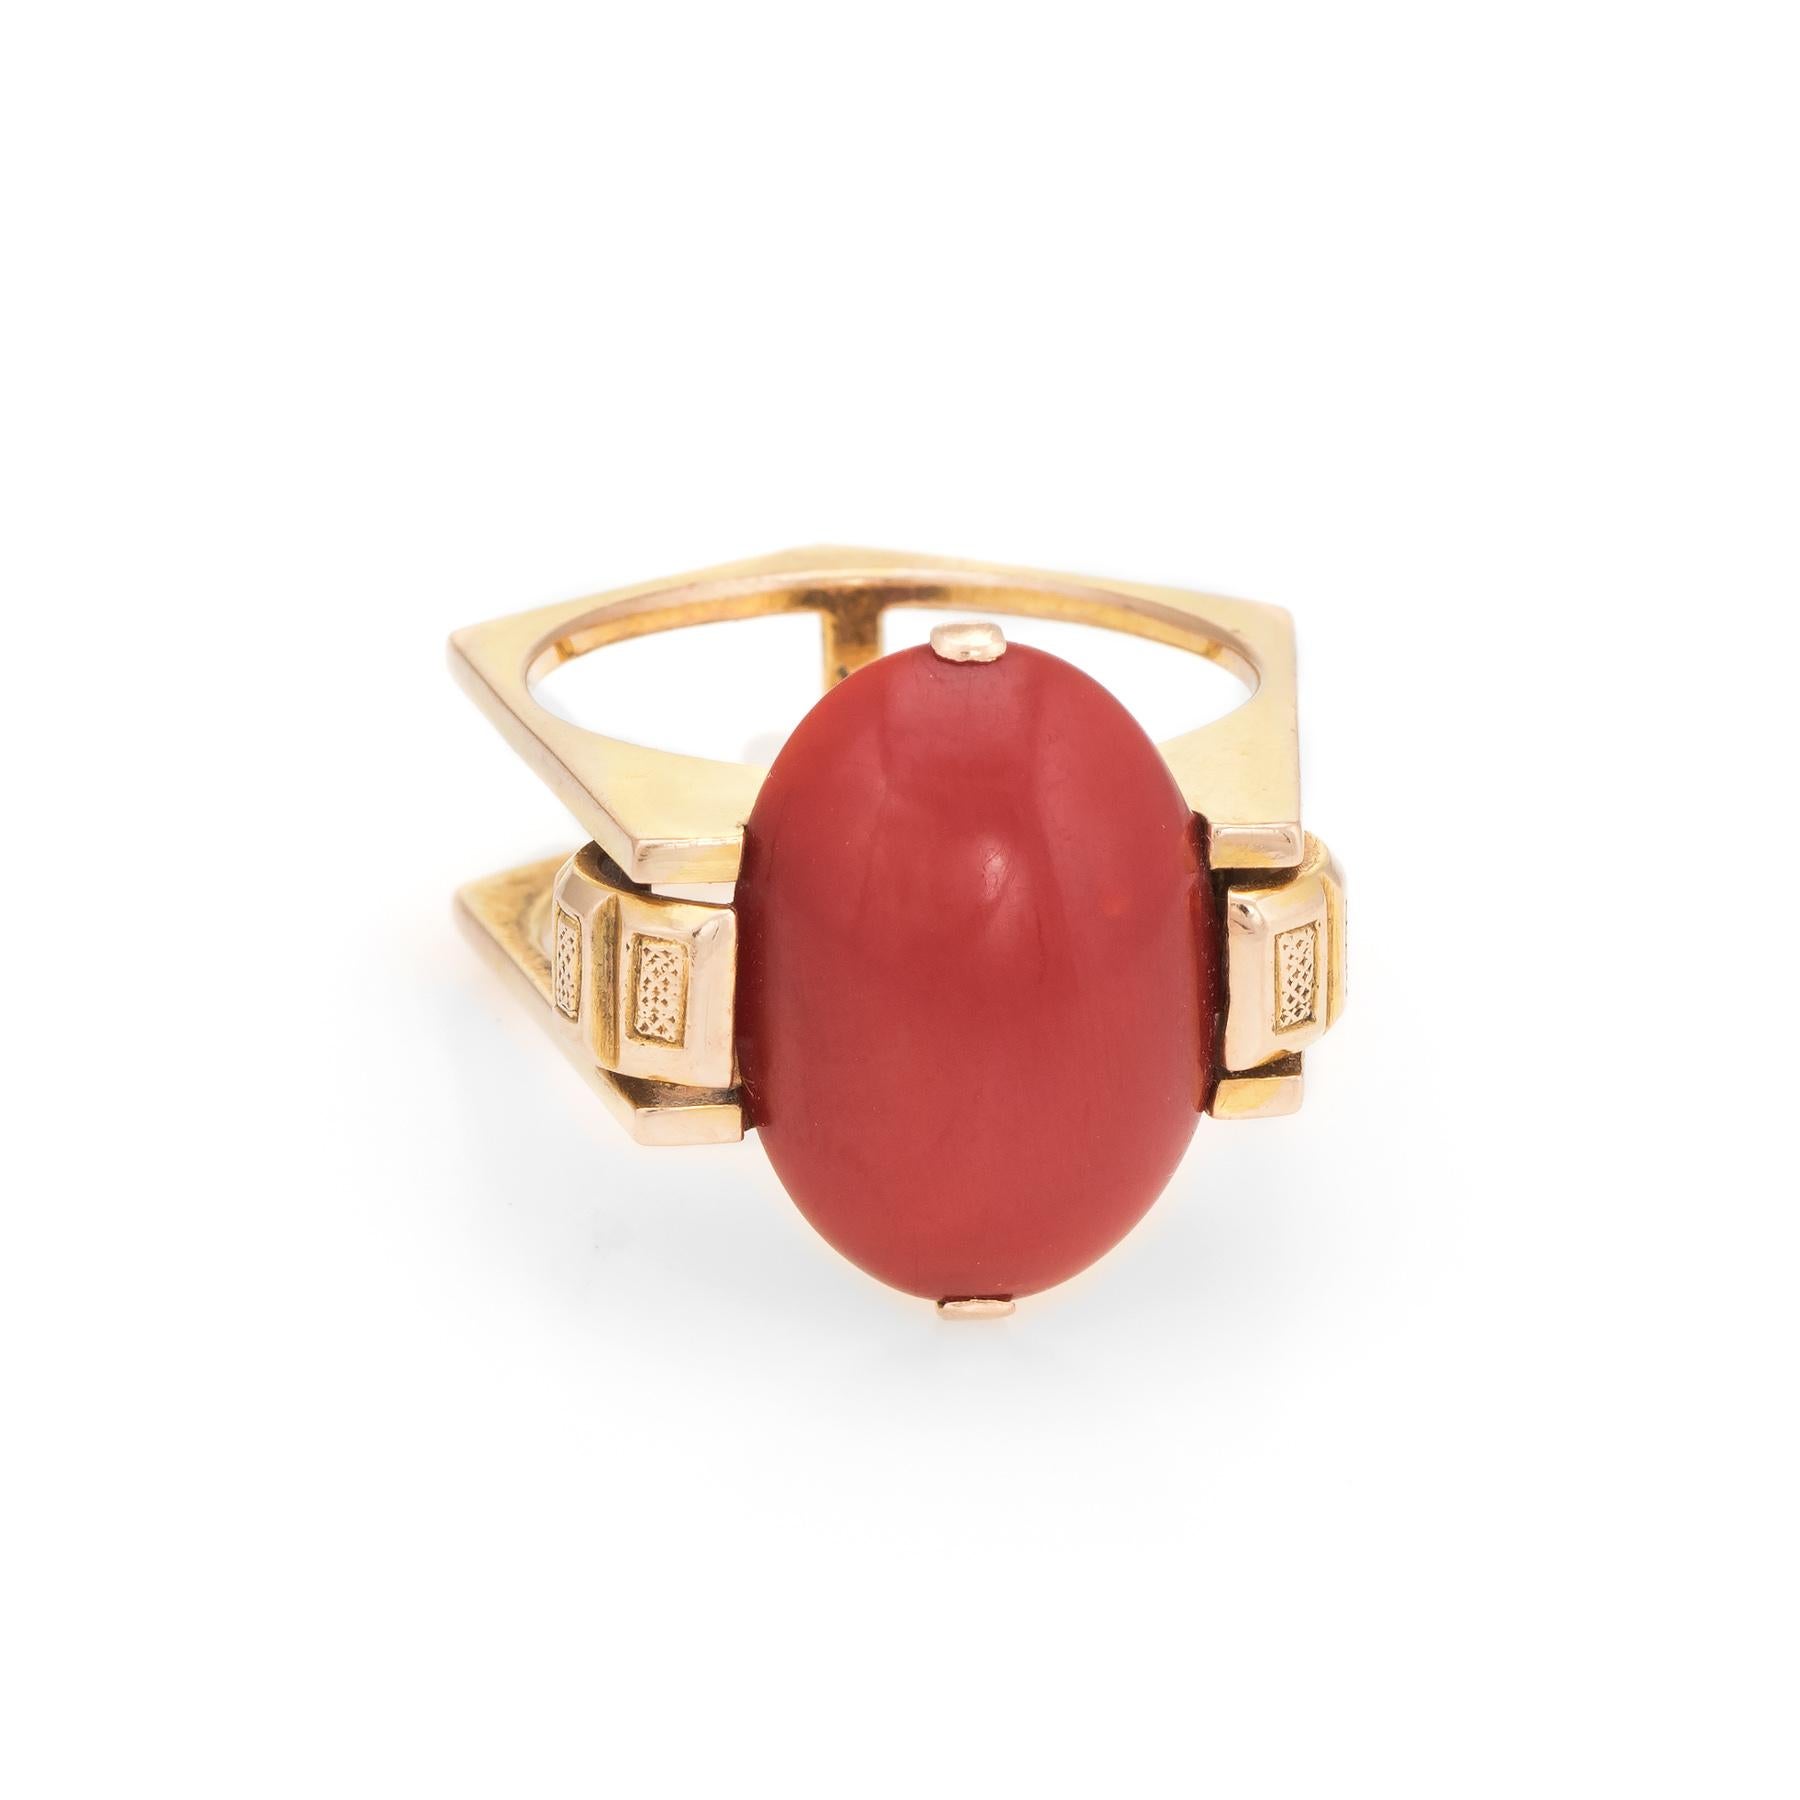 Distinct & stylish Mediterranean red coral cocktail ring (circa 1970s), crafted in 14 karat yellow gold. 

Centrally mounted Mediterranean red coral measures 16mm x 10mm (estimated at 7 carats). The coral is in excellent condition and free of cracks